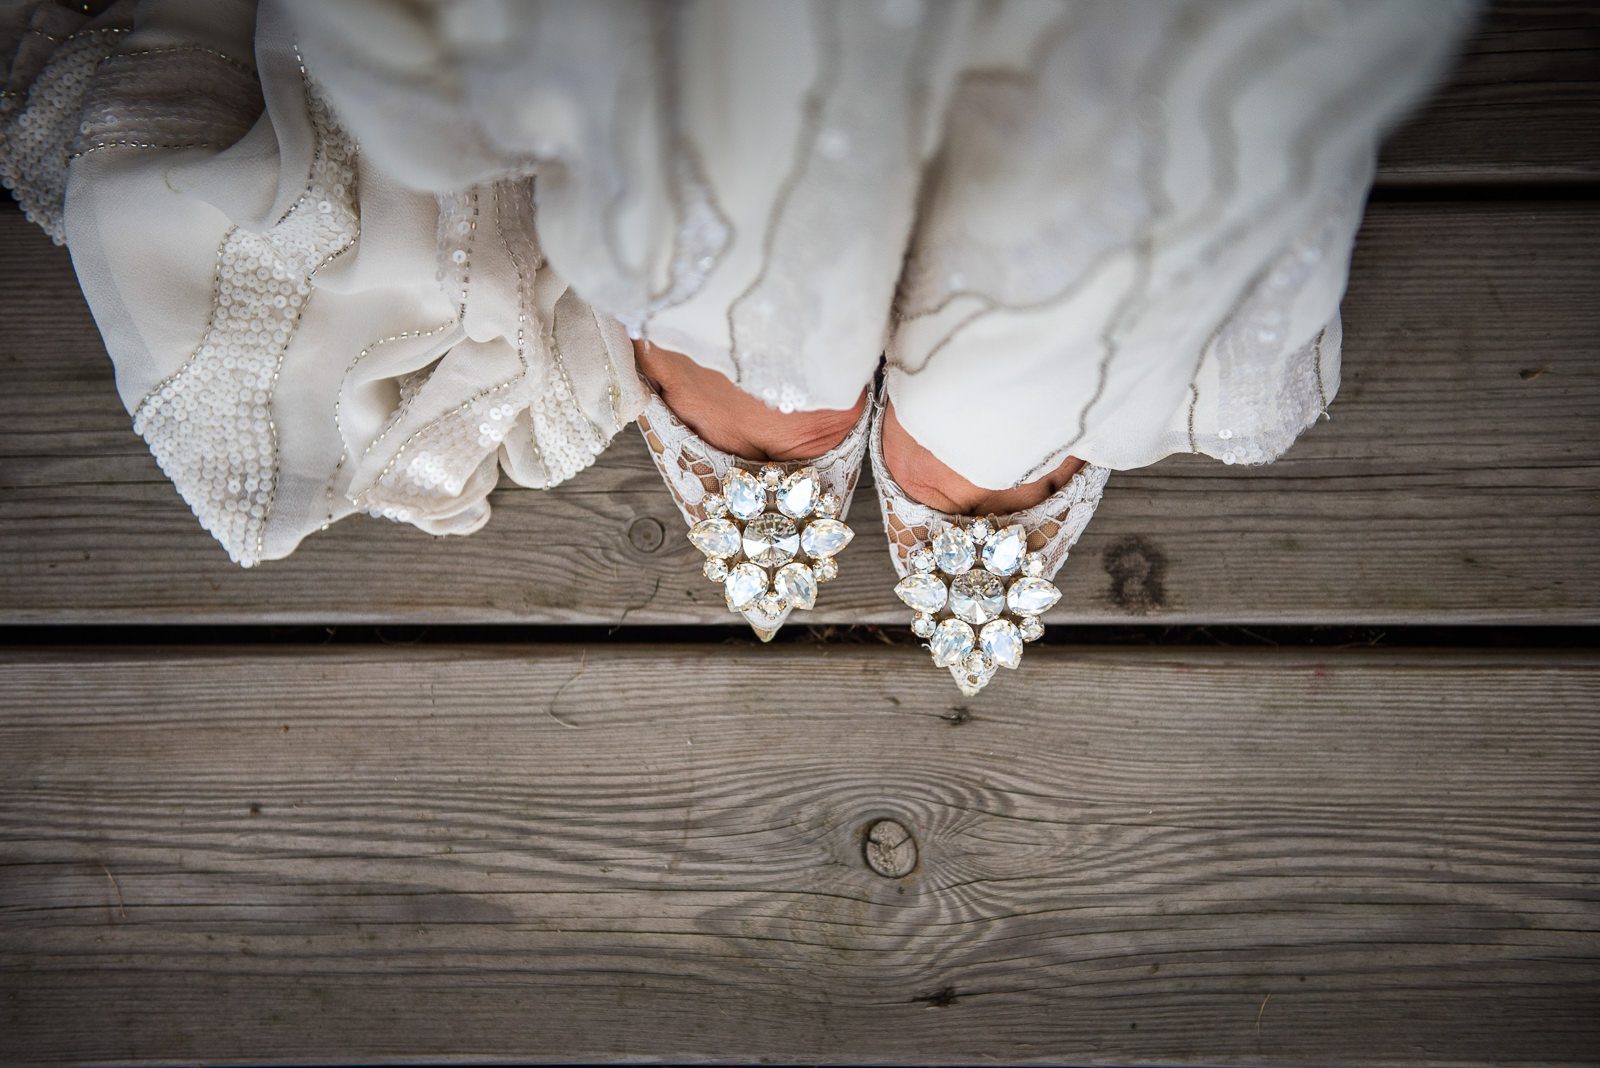 Glamorous lace and diamond bridal shoes teamed with a beaded Jenny Packham frock.